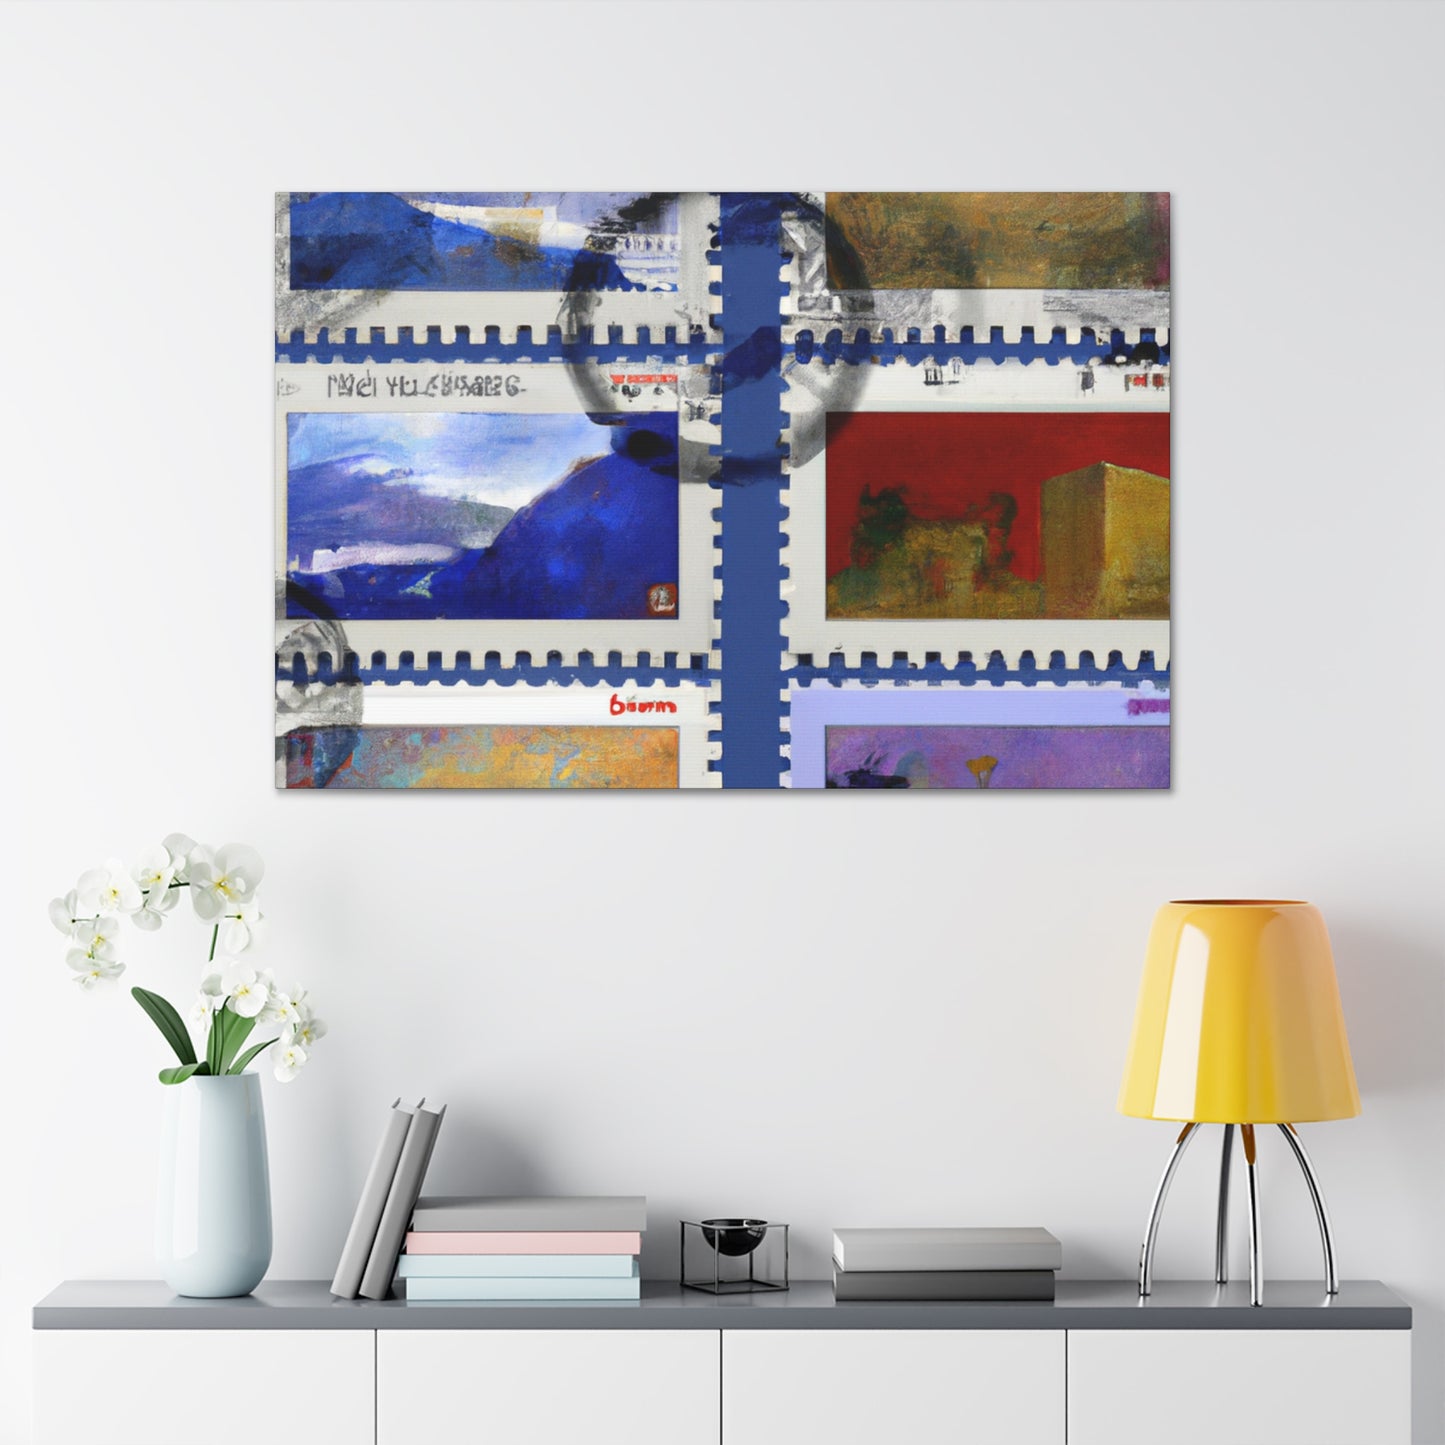 "Cultural Treasures of the World" - Postage Stamp Collector Canvas Wall Art